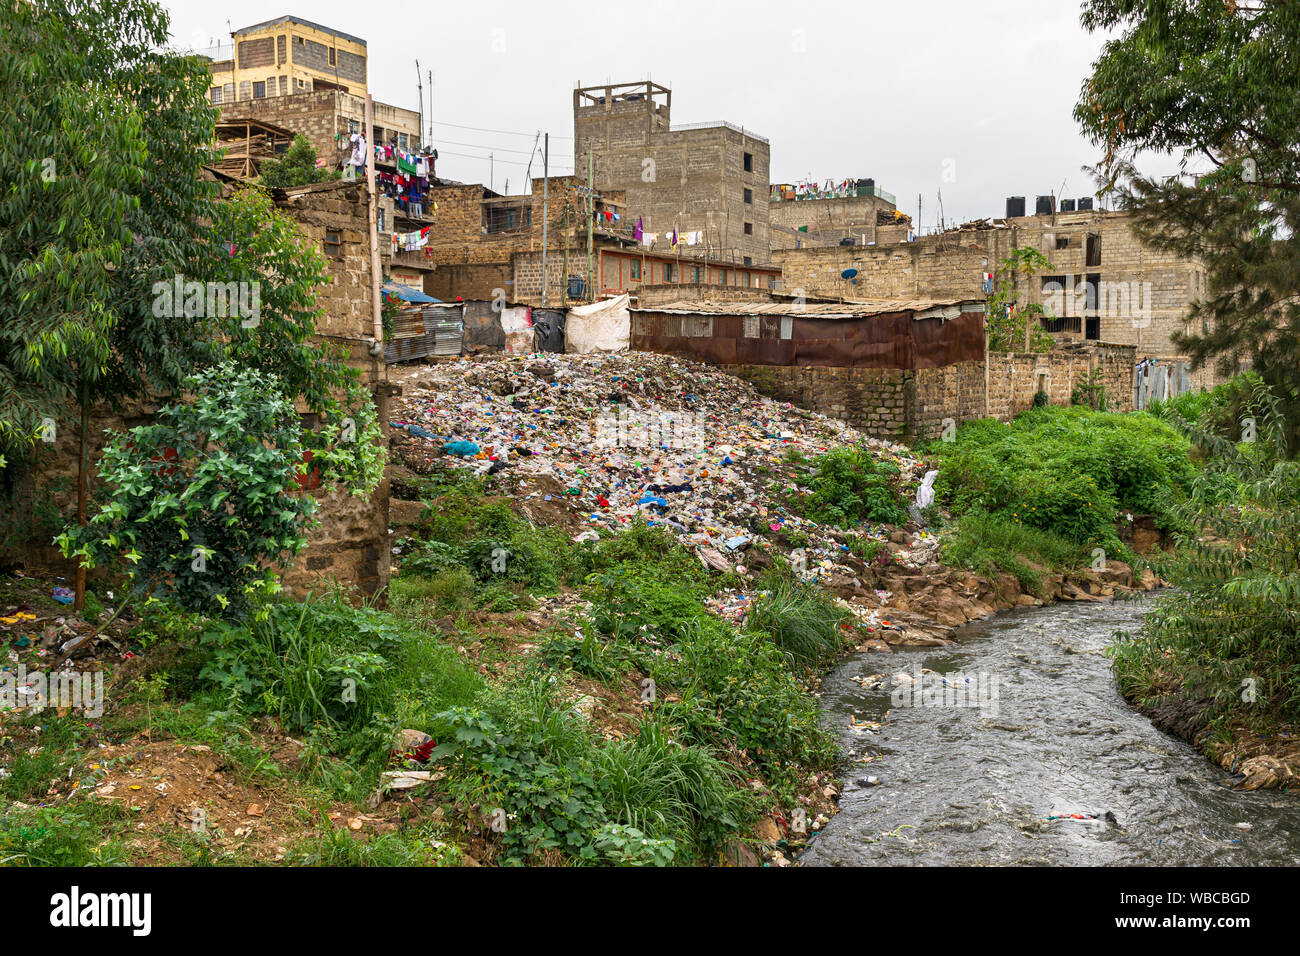 Mathare river with large pile of rubbish on the ground next to it behind housing, Nairobi, Kenya Stock Photo